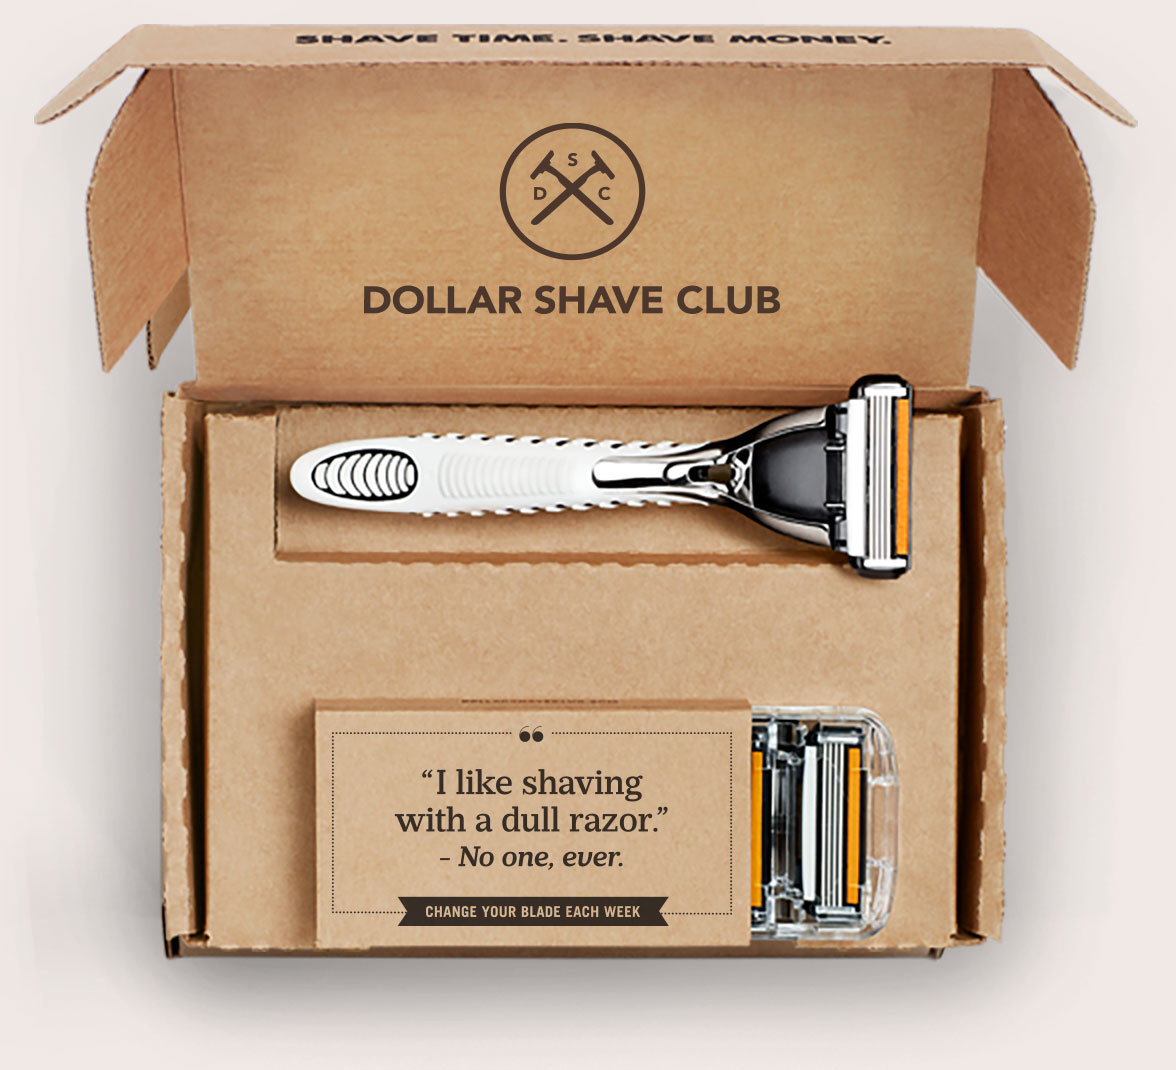 P&G (PG) Flounders as Unilever Targets Its Gillette Cash Cow with 'Dollar Shave Club ...1176 x 1070